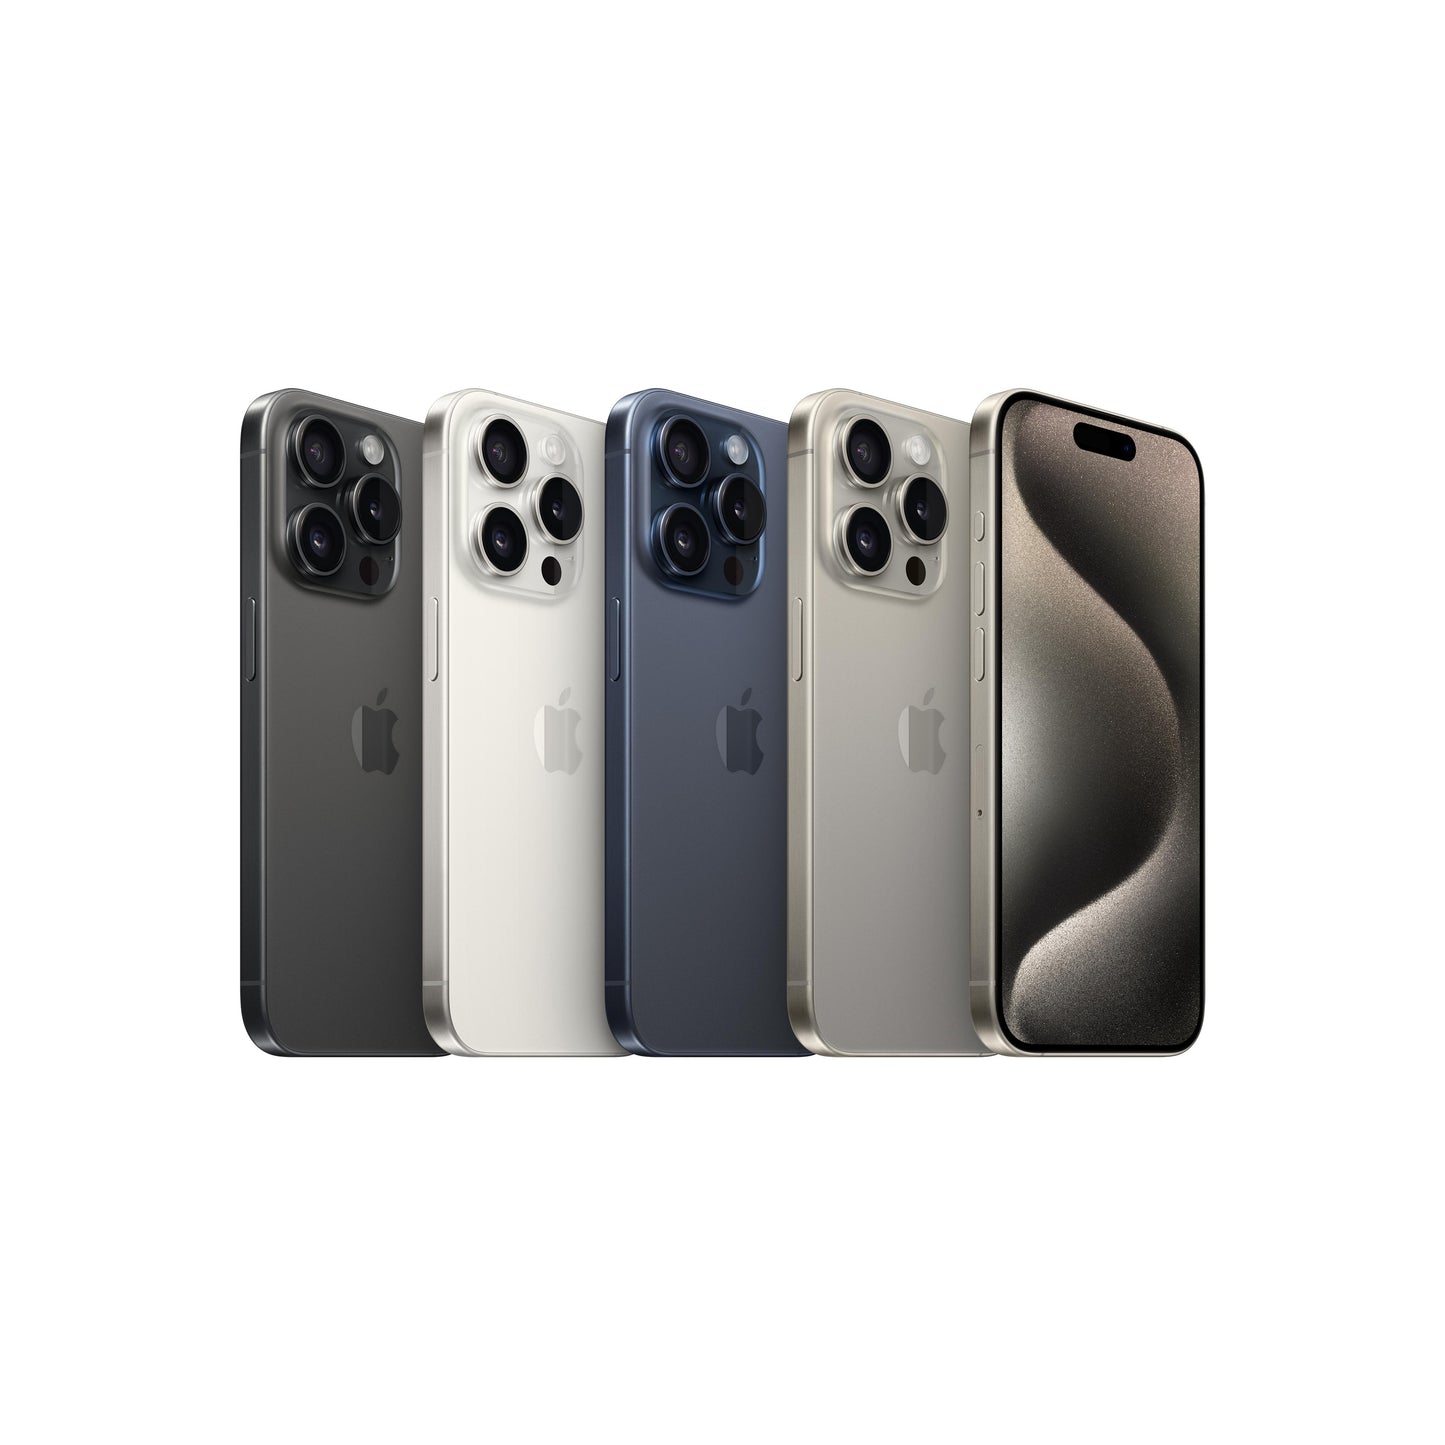 iPhone 15 Pro in Natural Titanium, 1TB Storage. EMI available |Get best offers for iphone 15 pro [variant] Natural Titanium 1TB.